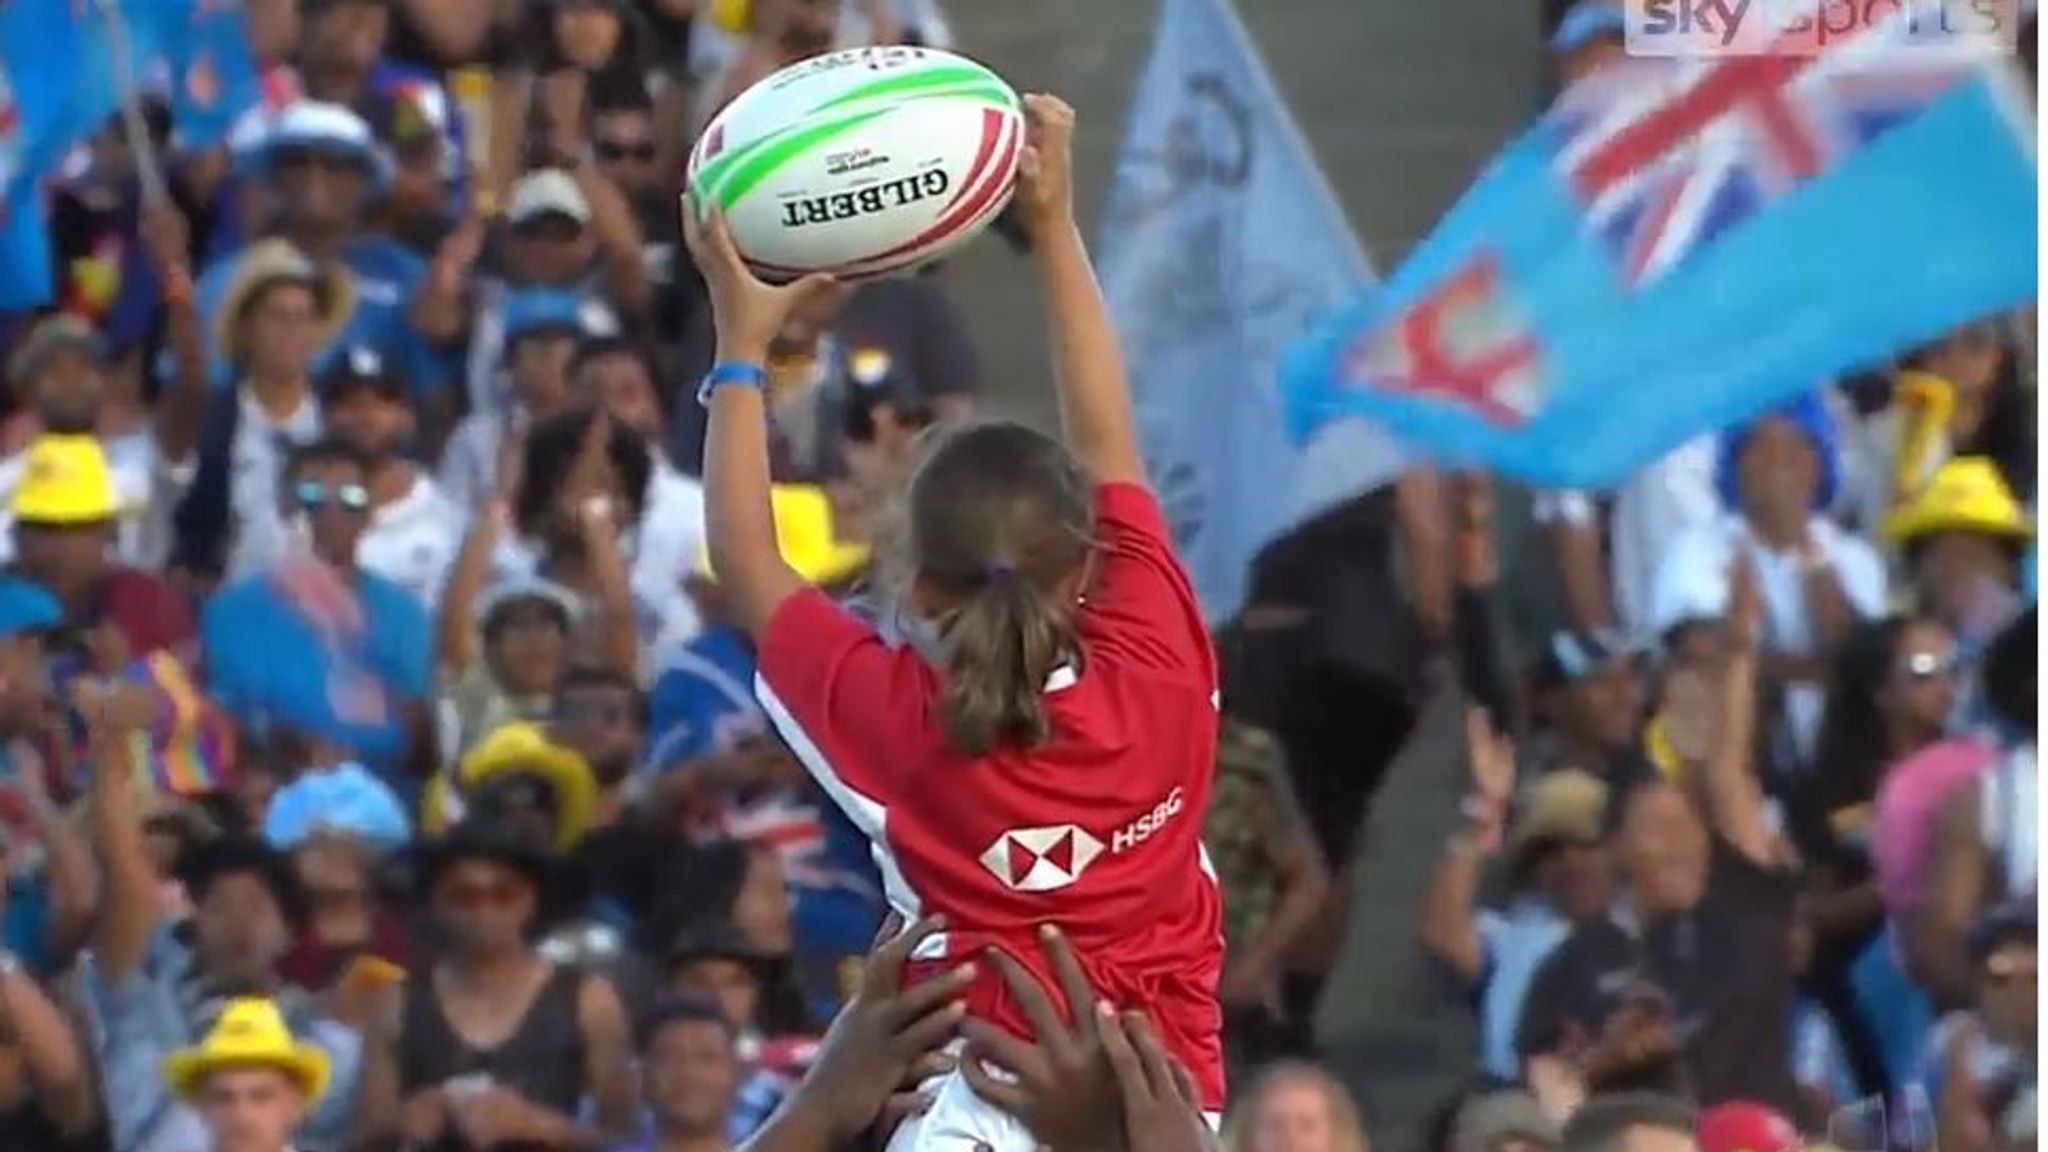 WATCH Fiji players lift ball girl ahead of cup final at Hamilton Sevens Rugby Union News Sky Sports